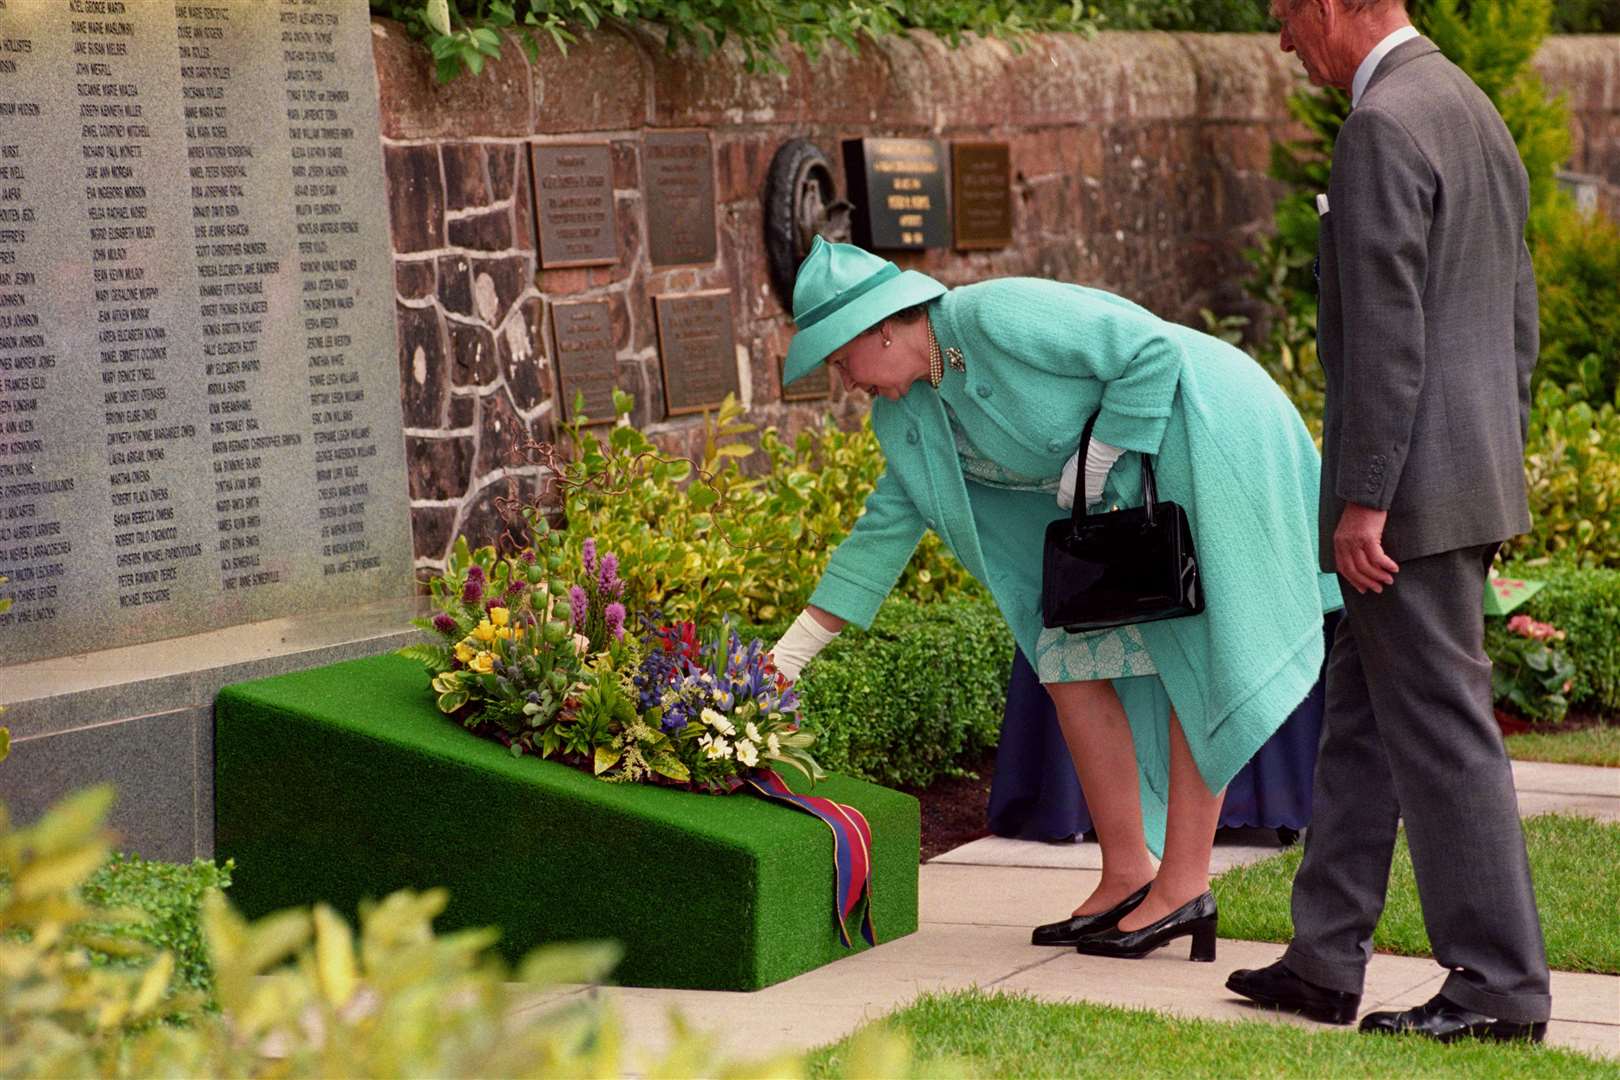 The late queen also laid a wreath at the memorial (Chris Bacon/PA)